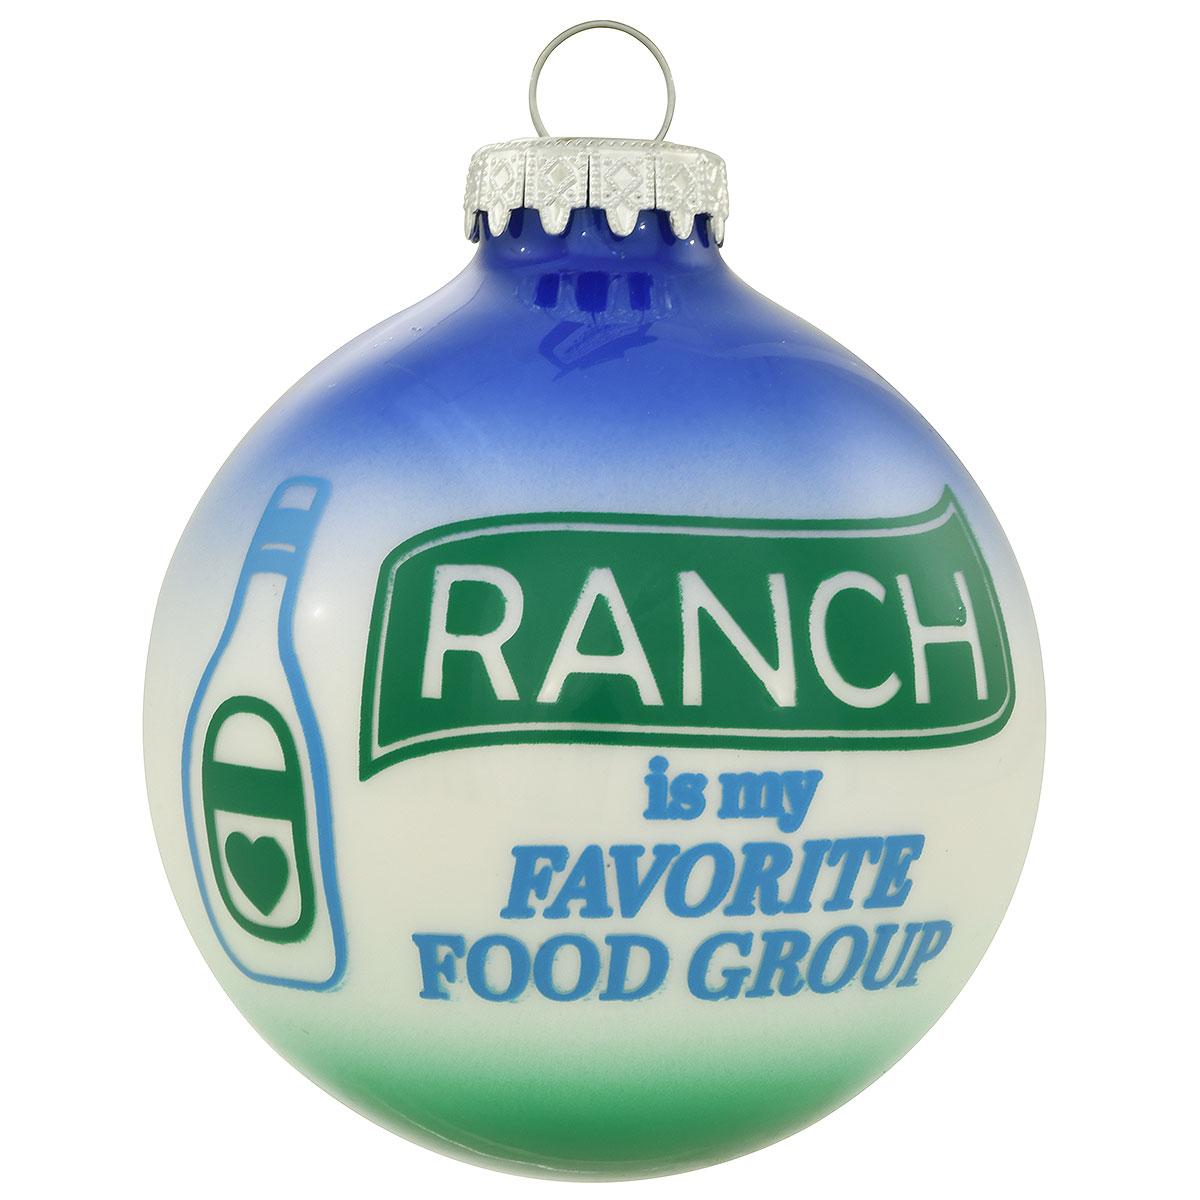 Ranch Favorite Food Group Ornament